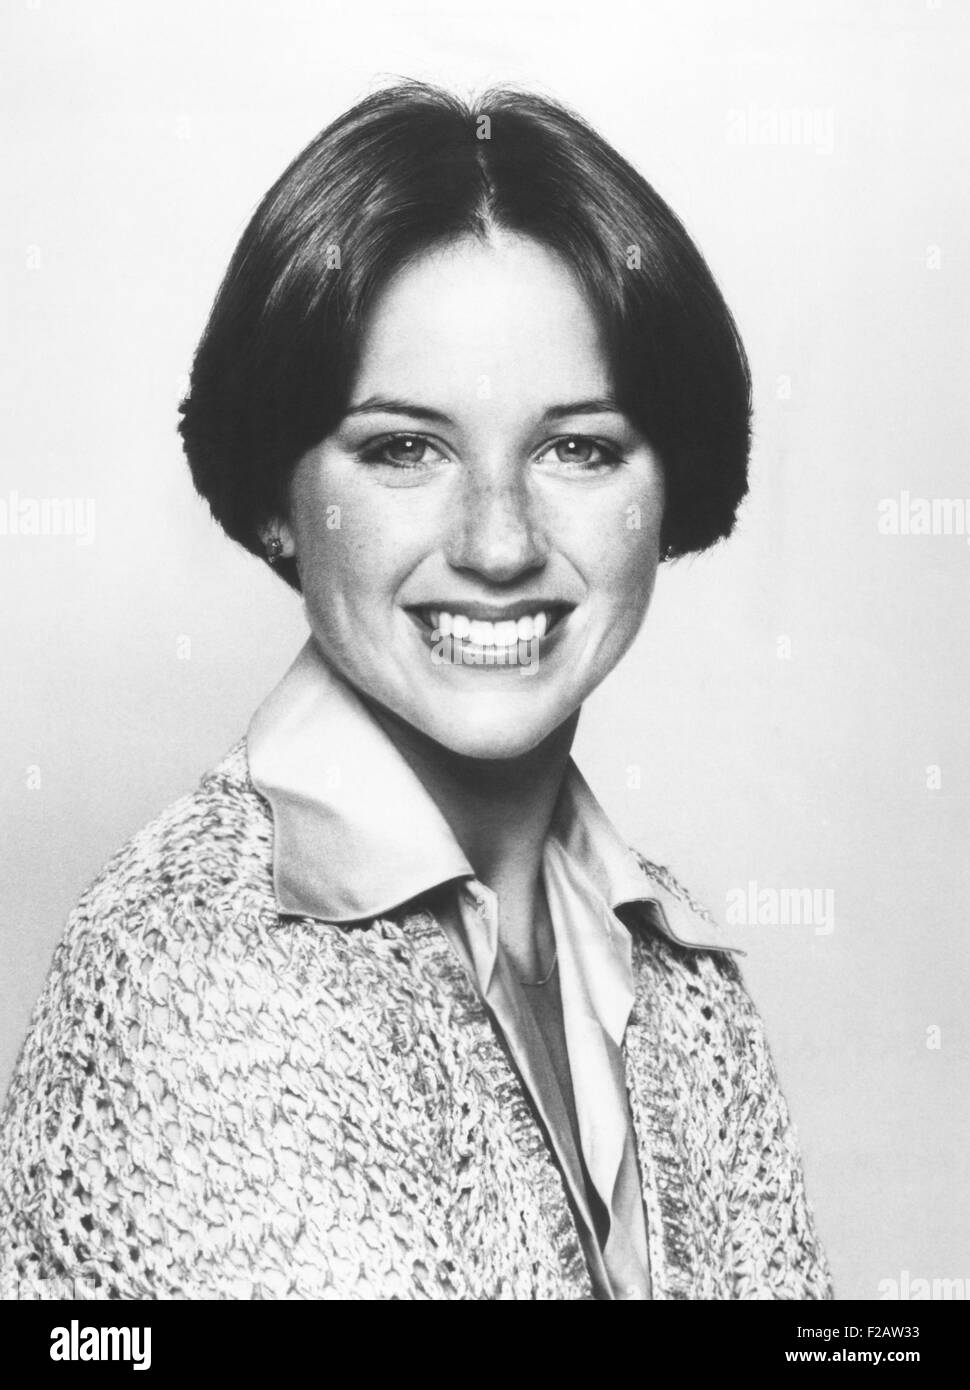 1976 Olympic Gold Medalist Dorothy Hamill. The figure skating champion's bobbed hairstyle inspired a hair fashion trend. (CSU 2015 11 1458) Stock Photo